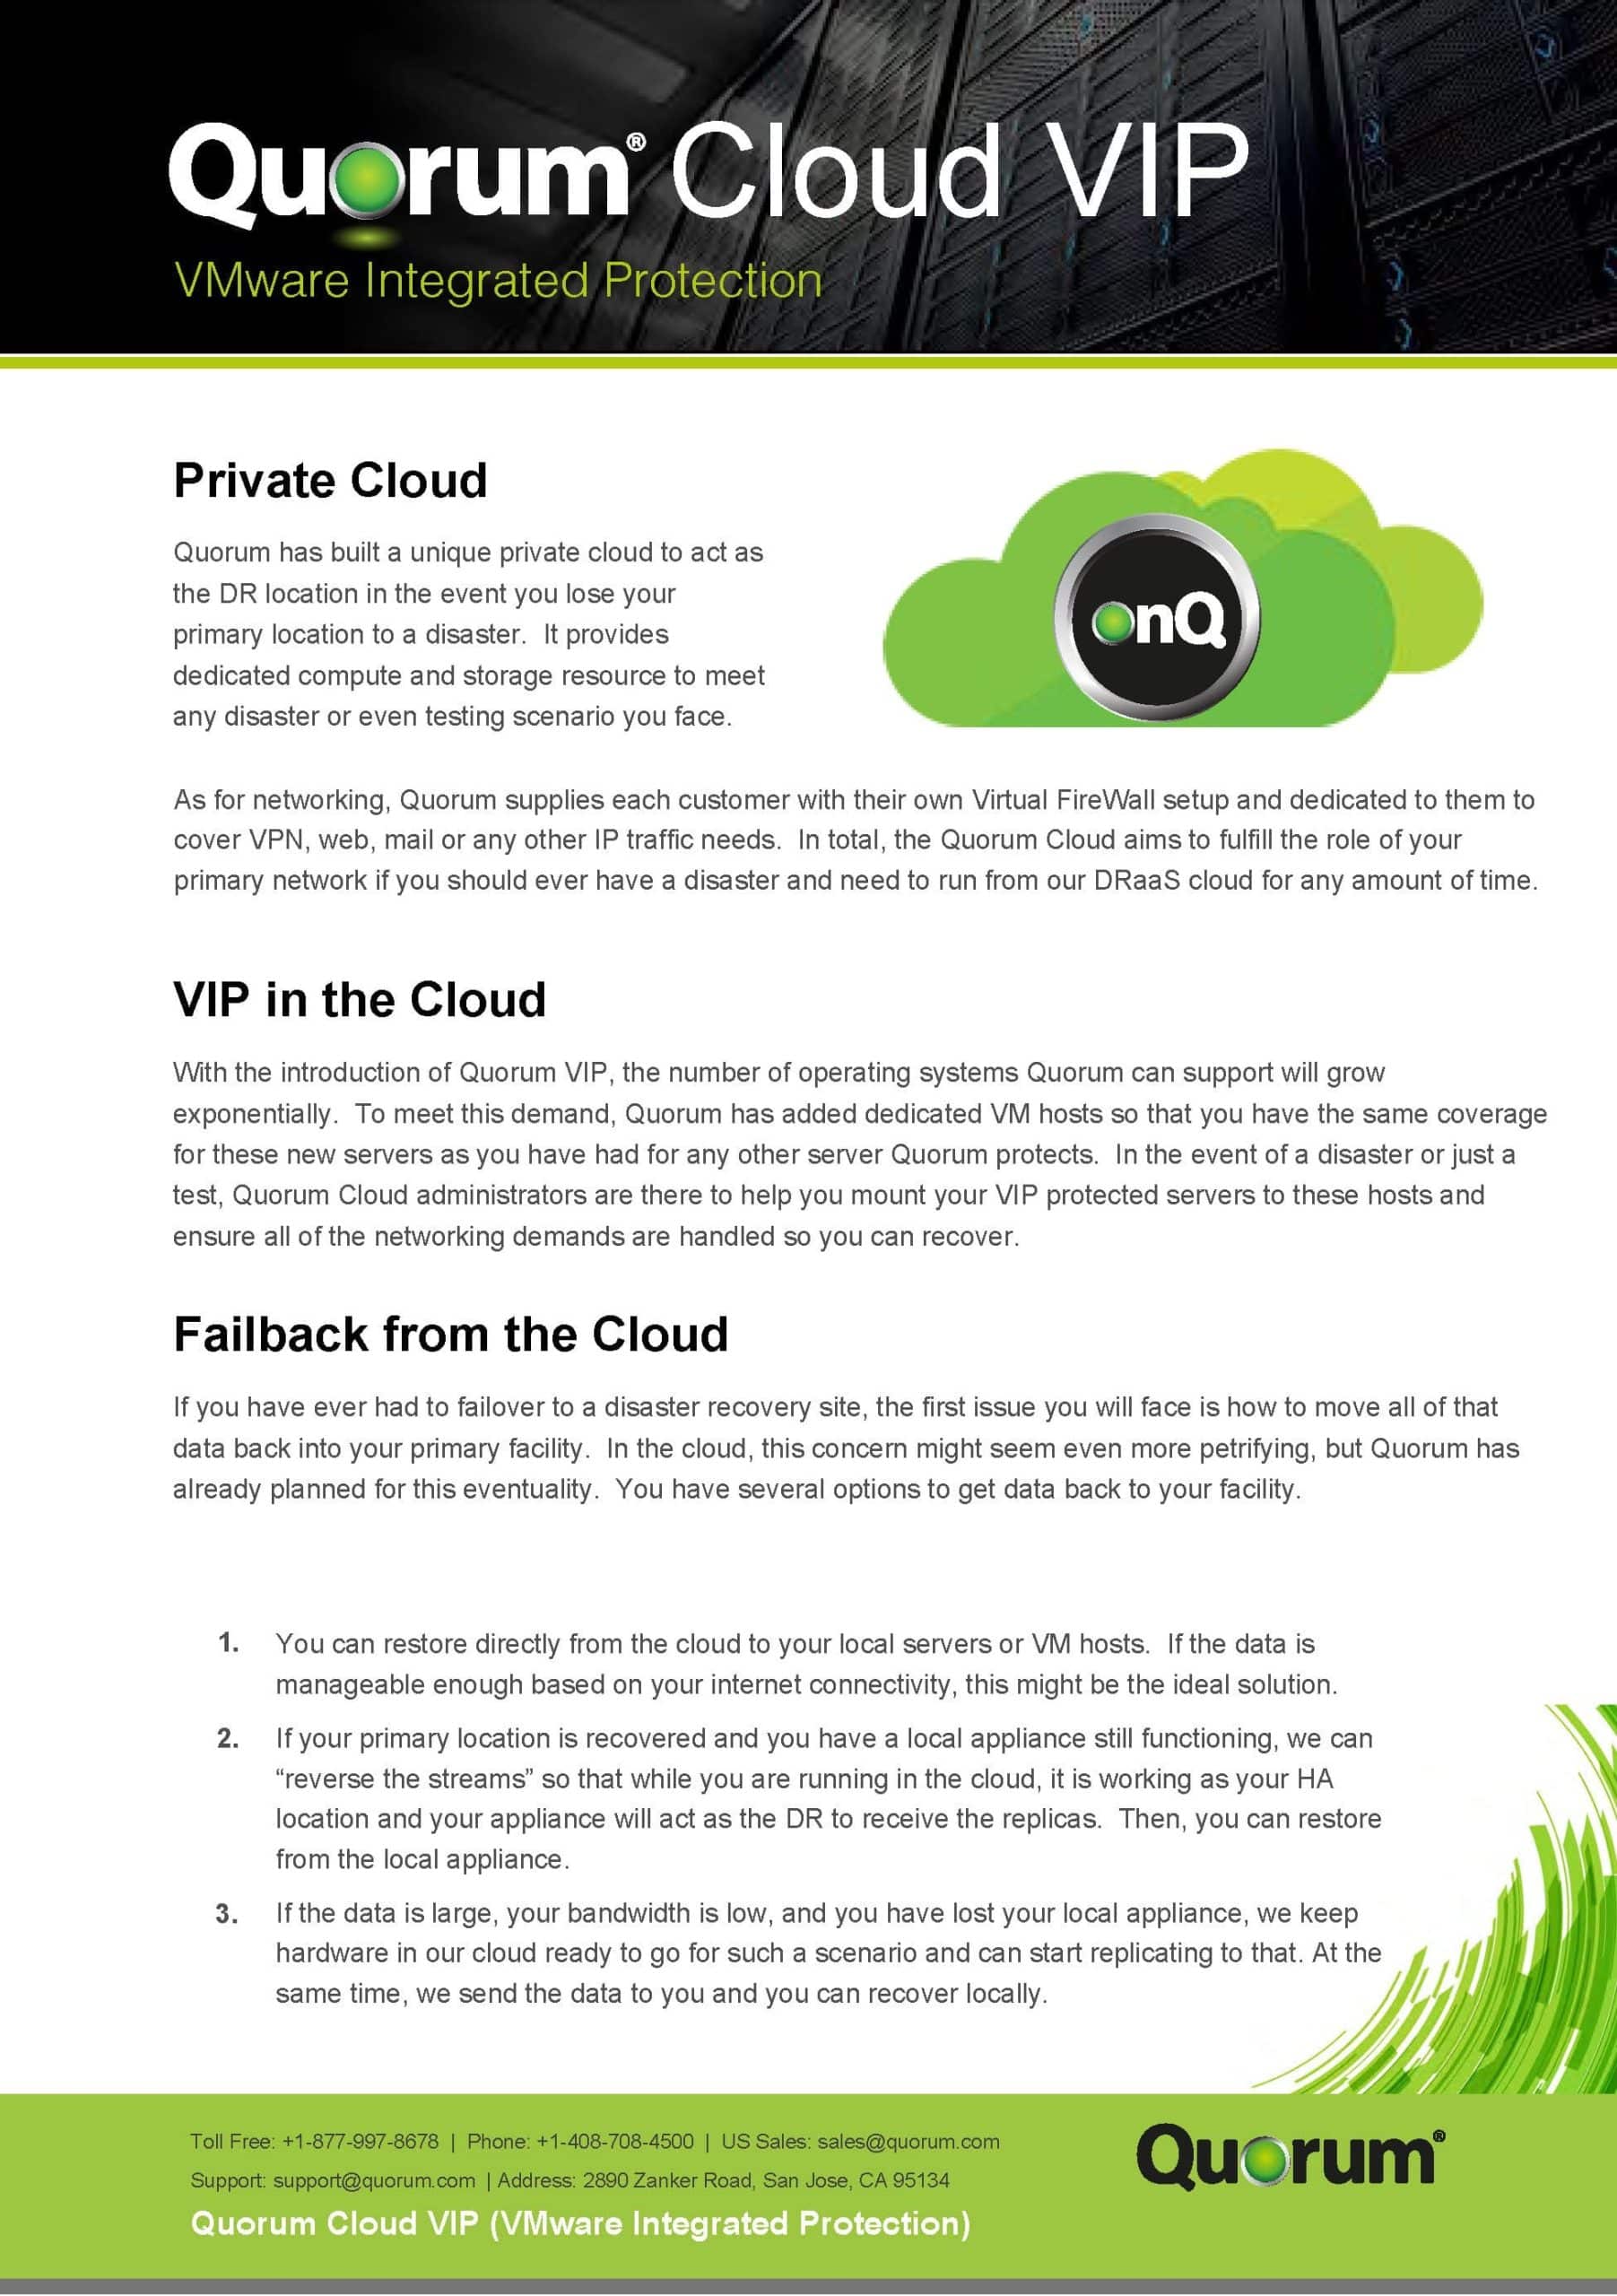 A promotional flyer titled "Quorum Cloud VIP - VMware Integrated Protection." It features sections detailing services including Private Cloud, VIP in the Cloud, and Failback from the Cloud. The flyer also includes Quorum's logo and brief descriptions under each section.